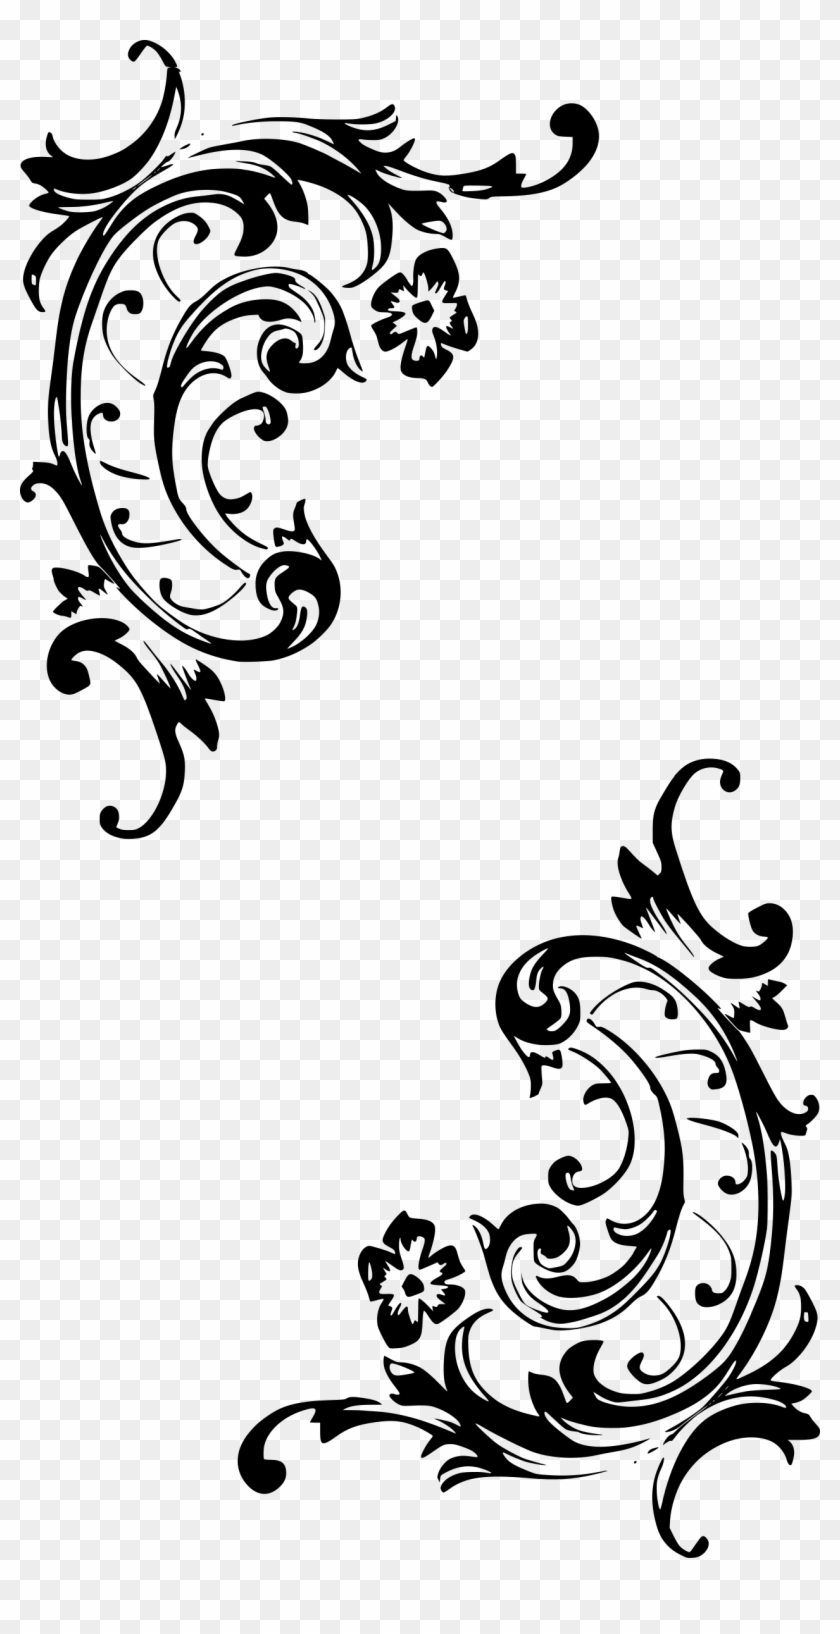 This Free Icons Png Design Of Baroque Pattern Clipart #1141059